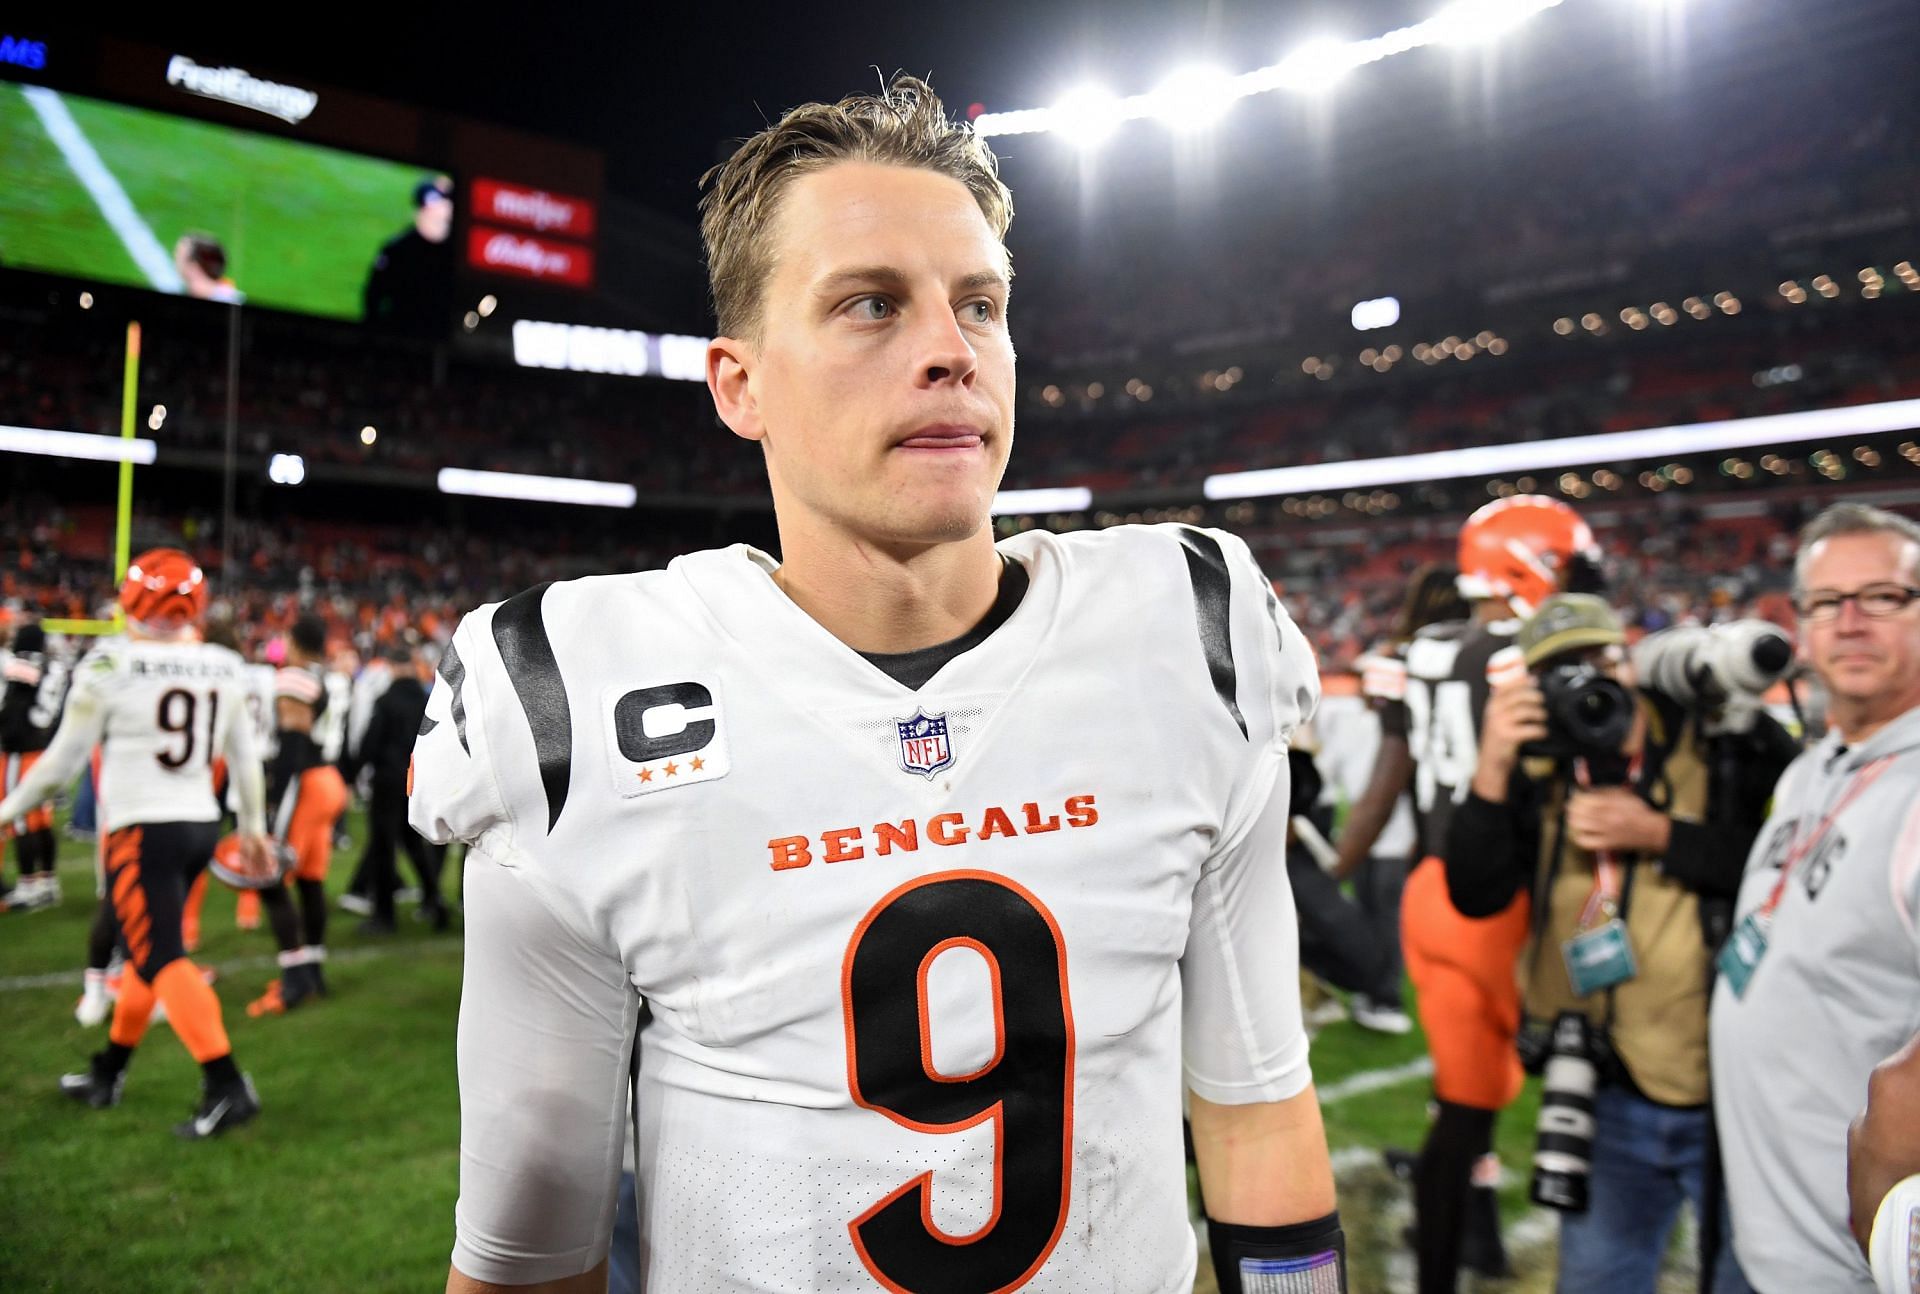 Joe Burrow is undoubtedly the best player on this list given his exploits for the Cincinnati Bengals in the NFL